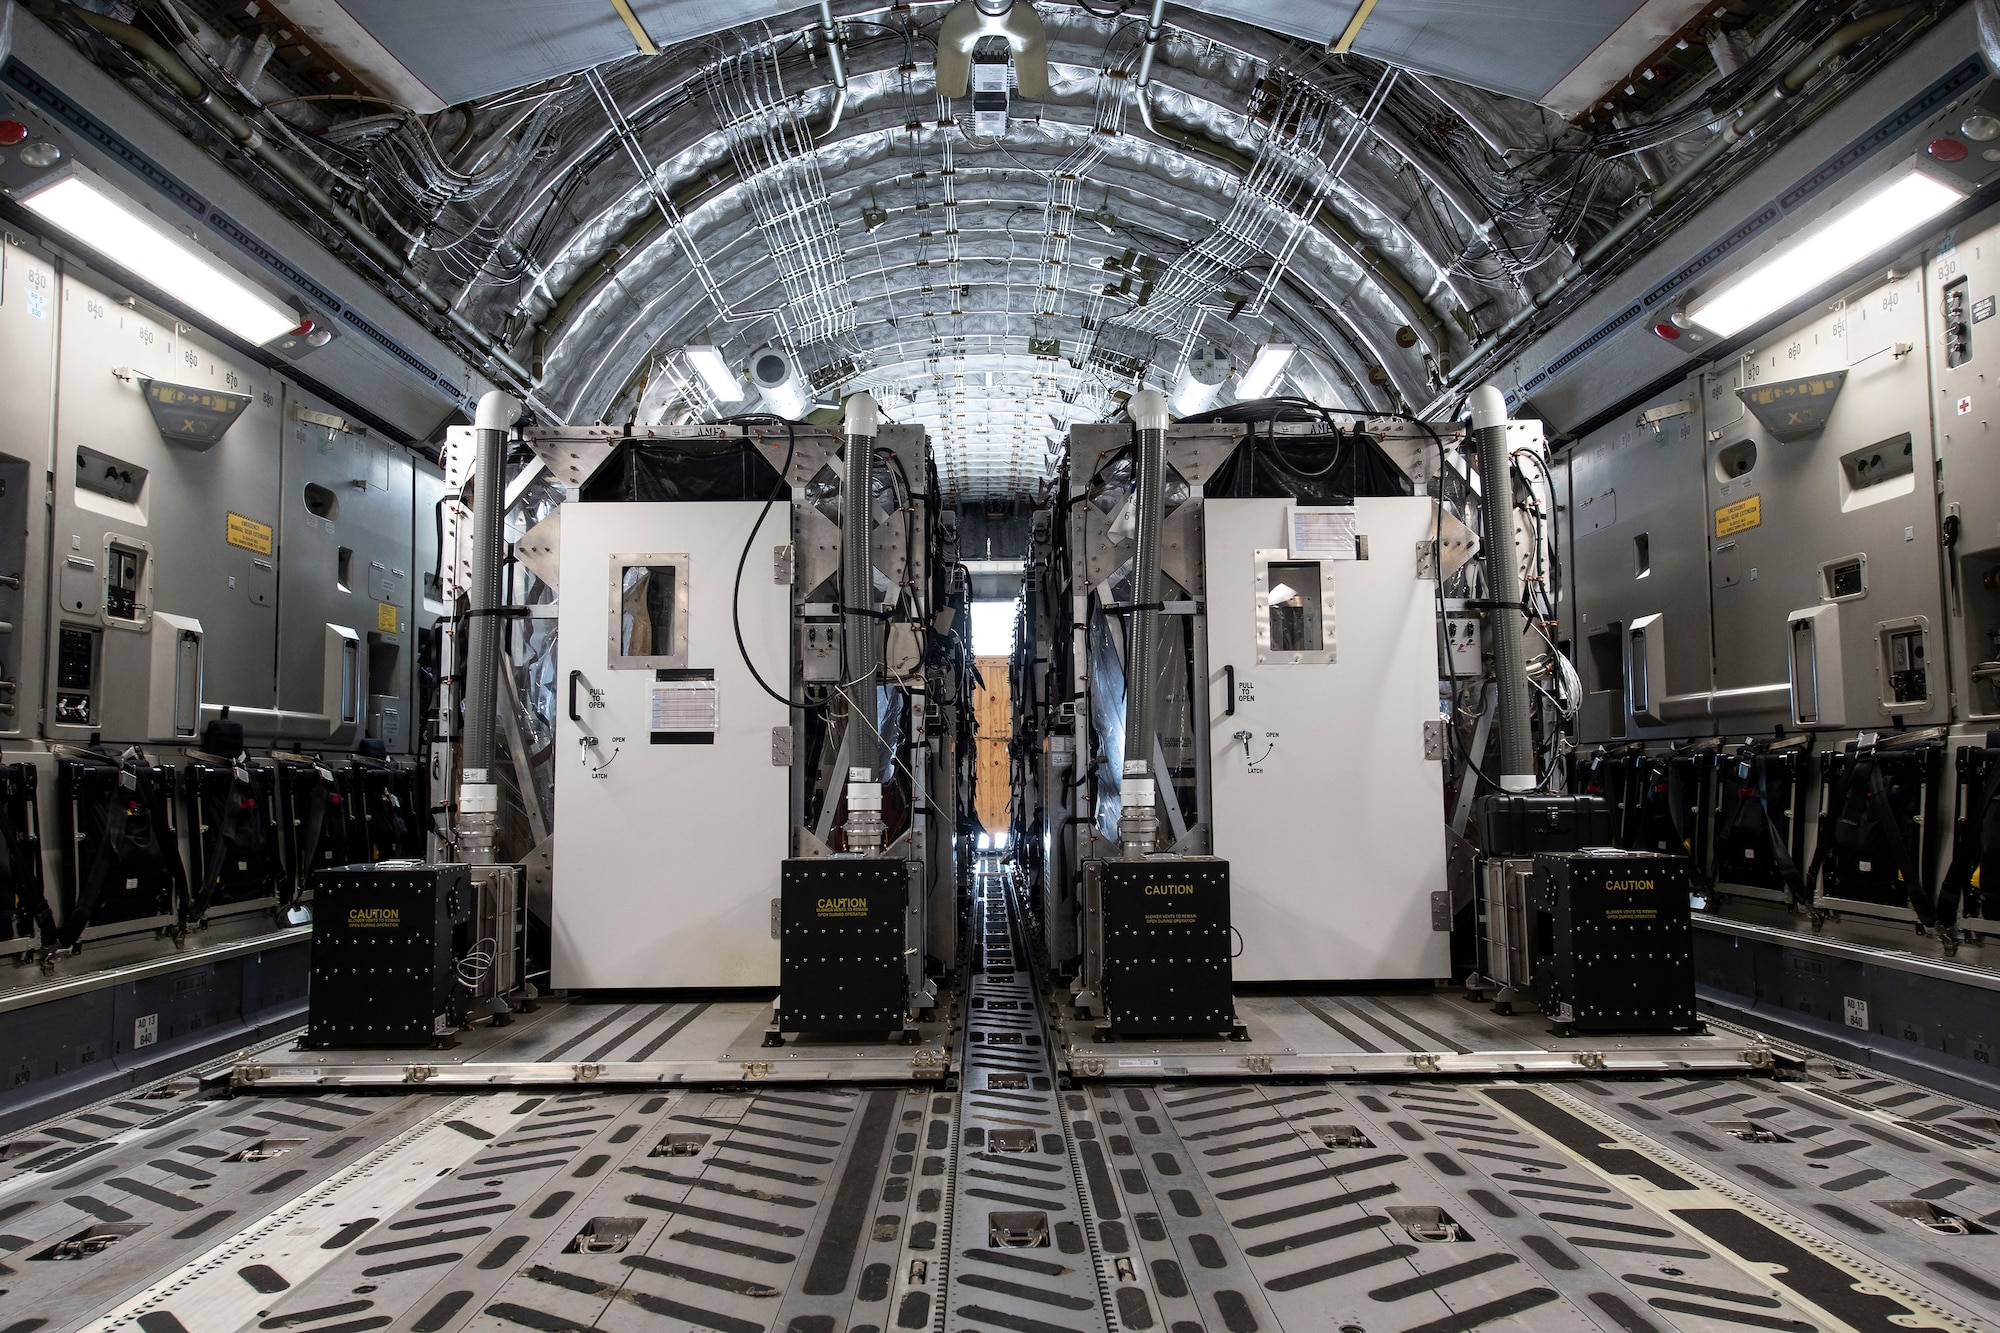 Two Transport Isolation System capsules are placed in the cargo bay of a C-17 Globemaster III April 28, 2020, at Travis Air Force Base, California. TIS capsules, which were initially engineered in response to the Ebola virus in 2014, allow the transport of individuals with highly contagious diseases without infecting any other passengers or aircrew on the aircraft. (U.S. Air Force photo by Senior Airman Christian Conrad)